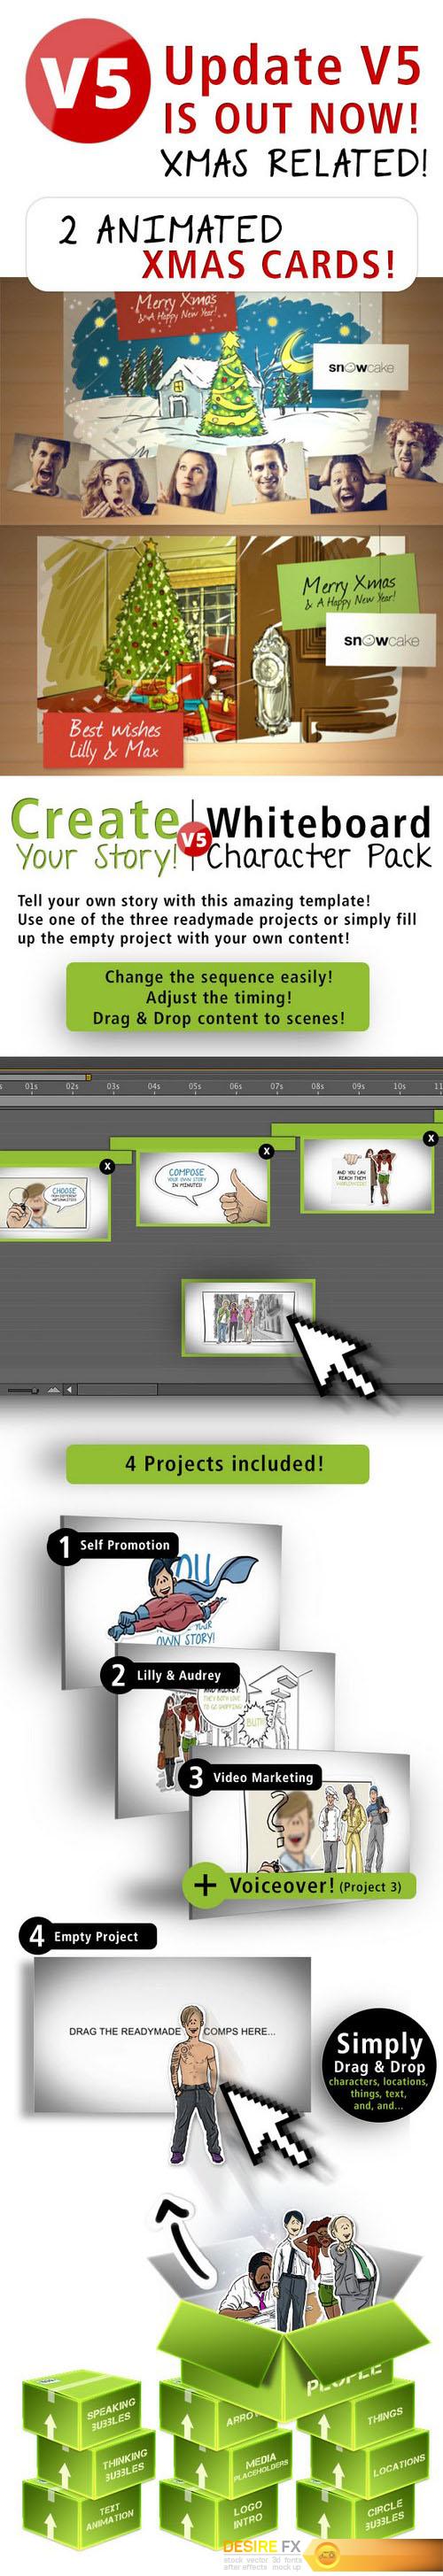 videohive-5833338-create-your-story-whiteboard-character-pack